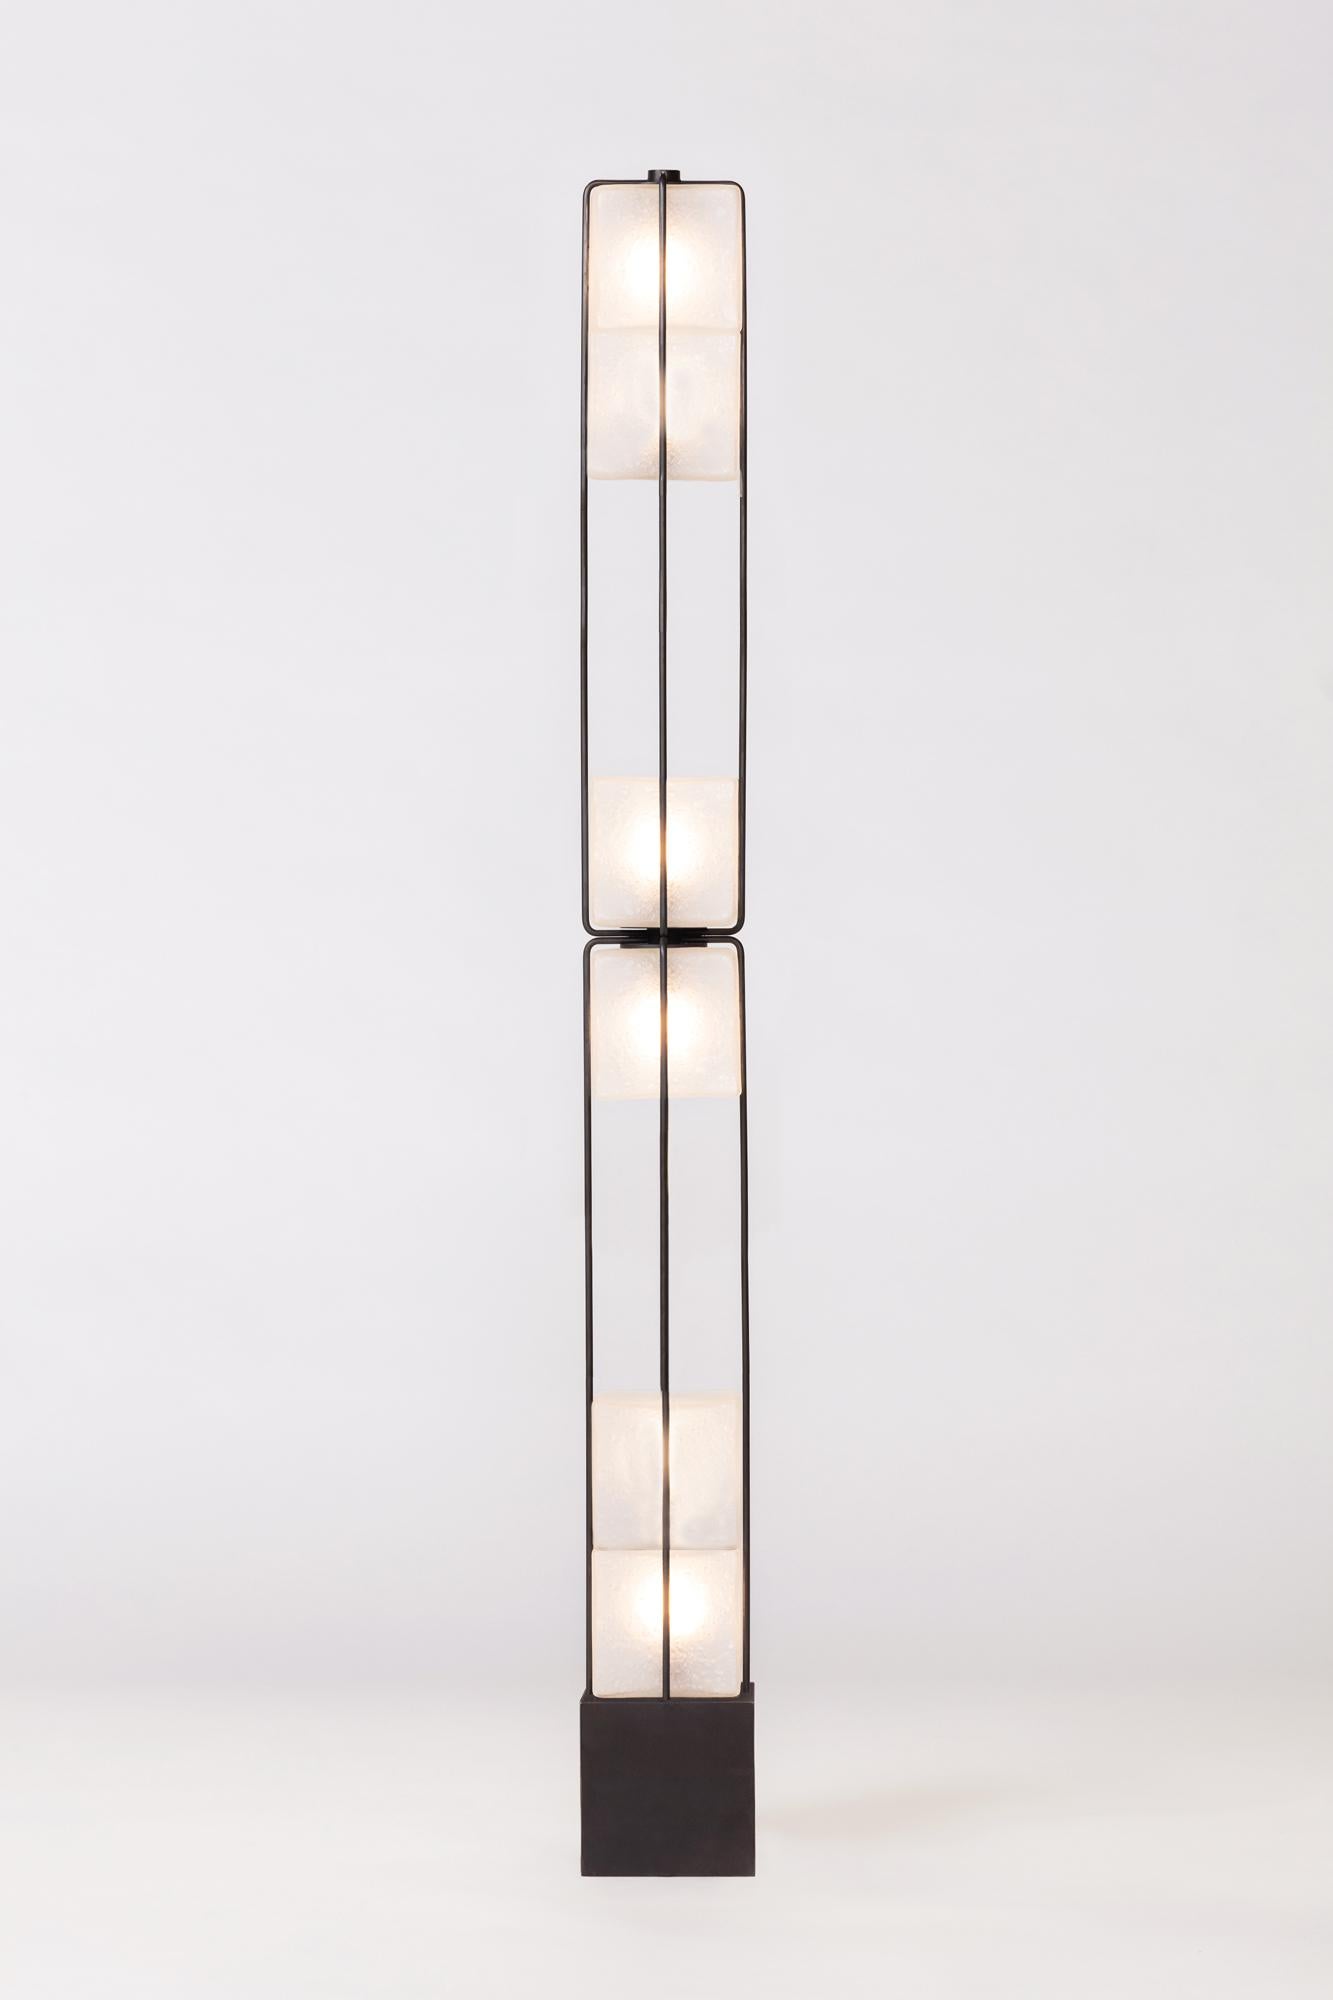 The Alice collection is inspired by Brutalist modular architecture. The textured handblown glass cubes are sandblasted to create a soft glow and stacked together to diffuse light in different intensities. The frame is made of solid brass, finished